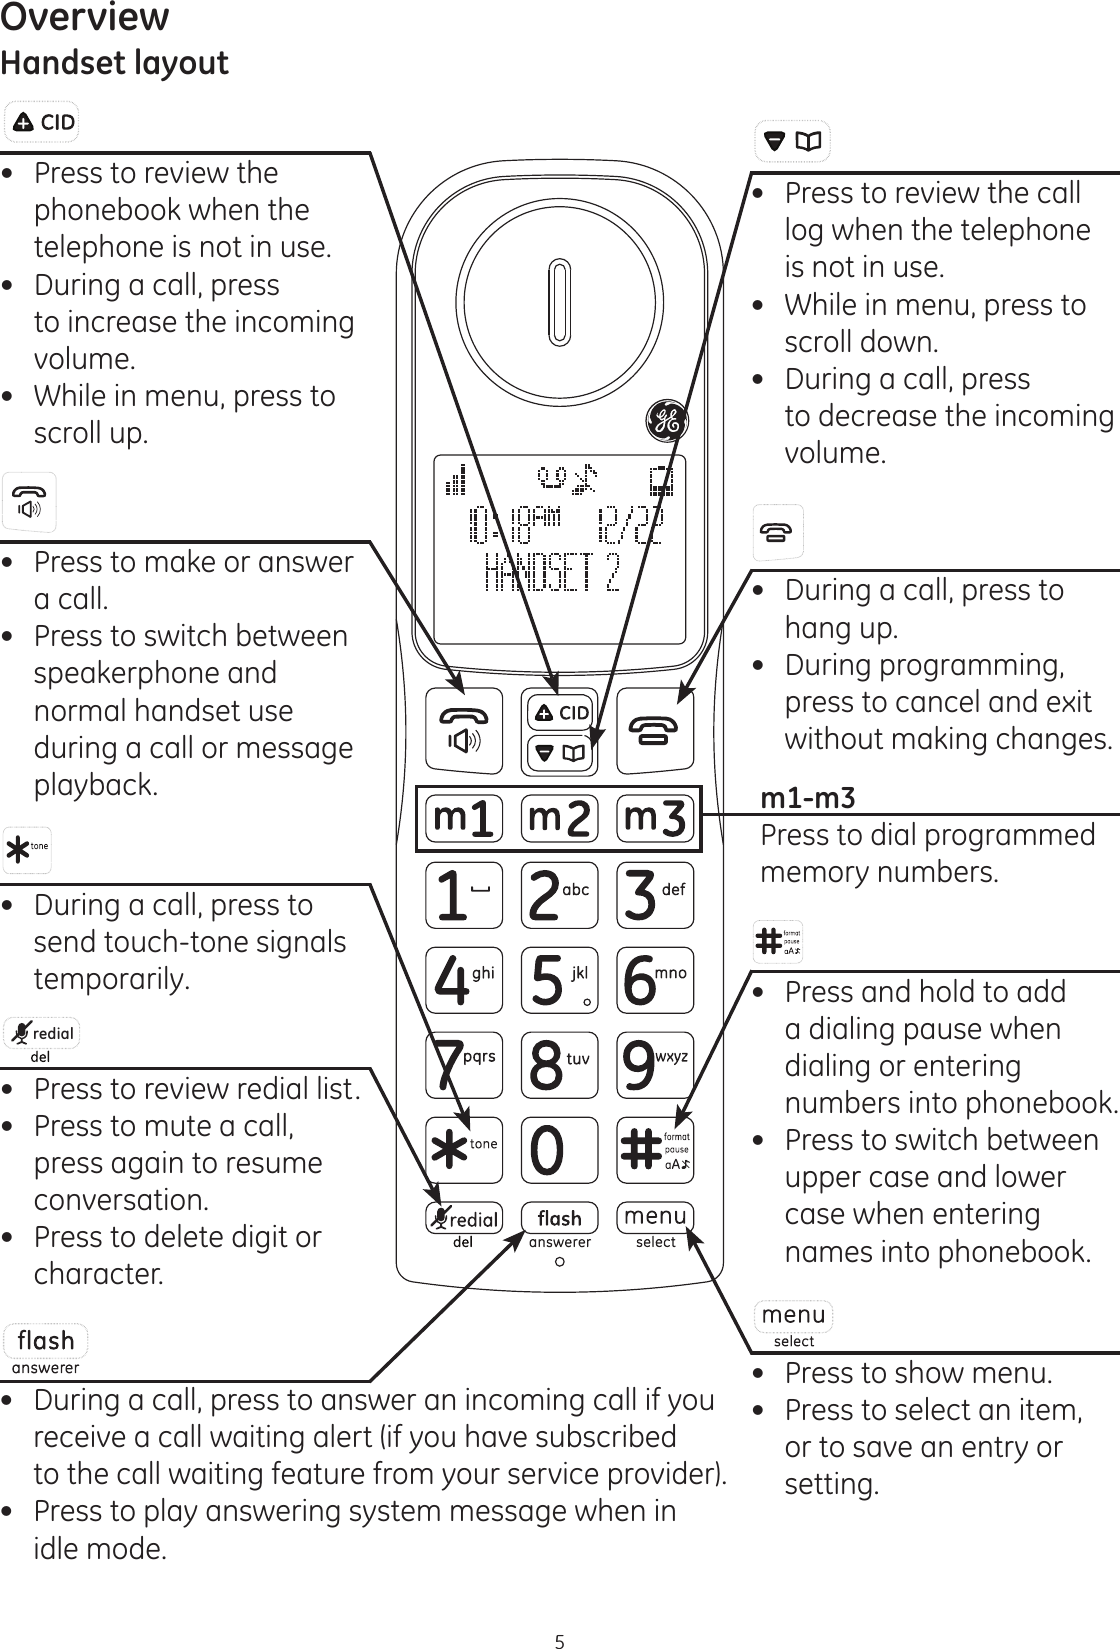 Overview5Handset layout Press to review the phonebook when the telephone is not in use. During a call, press  to increase the incoming  volume. While in menu, press to  scroll up.  Press to make or answer  a call.  Press to switch between speakerphone and normal handset use during a call or message playback.  During a call, press to send touch-tone signals temporarily.redial Press to review redial list. Press to mute a call, press again to resume conversation. Press to delete digit or character.  Press to review the call  log when the telephone  is not in use.  While in menu, press to  scroll down.  During a call, press  to decrease the incoming  volume.  During a call, press to hang up. During programming, press to cancel and exit without making changes.  Press and hold to add a dialing pause when dialing or entering numbers into phonebook.  Press to switch between upper case and lower case when entering names into phonebook. Press to show menu. Press to select an item, or to save an entry or setting.   During a call, press to answer an incoming call if you receive a call waiting alert (if you have subscribed to the call waiting feature from your service provider). Press to play answering system message when in idle mode. m1-m3 Press to dial programmed memory numbers.  